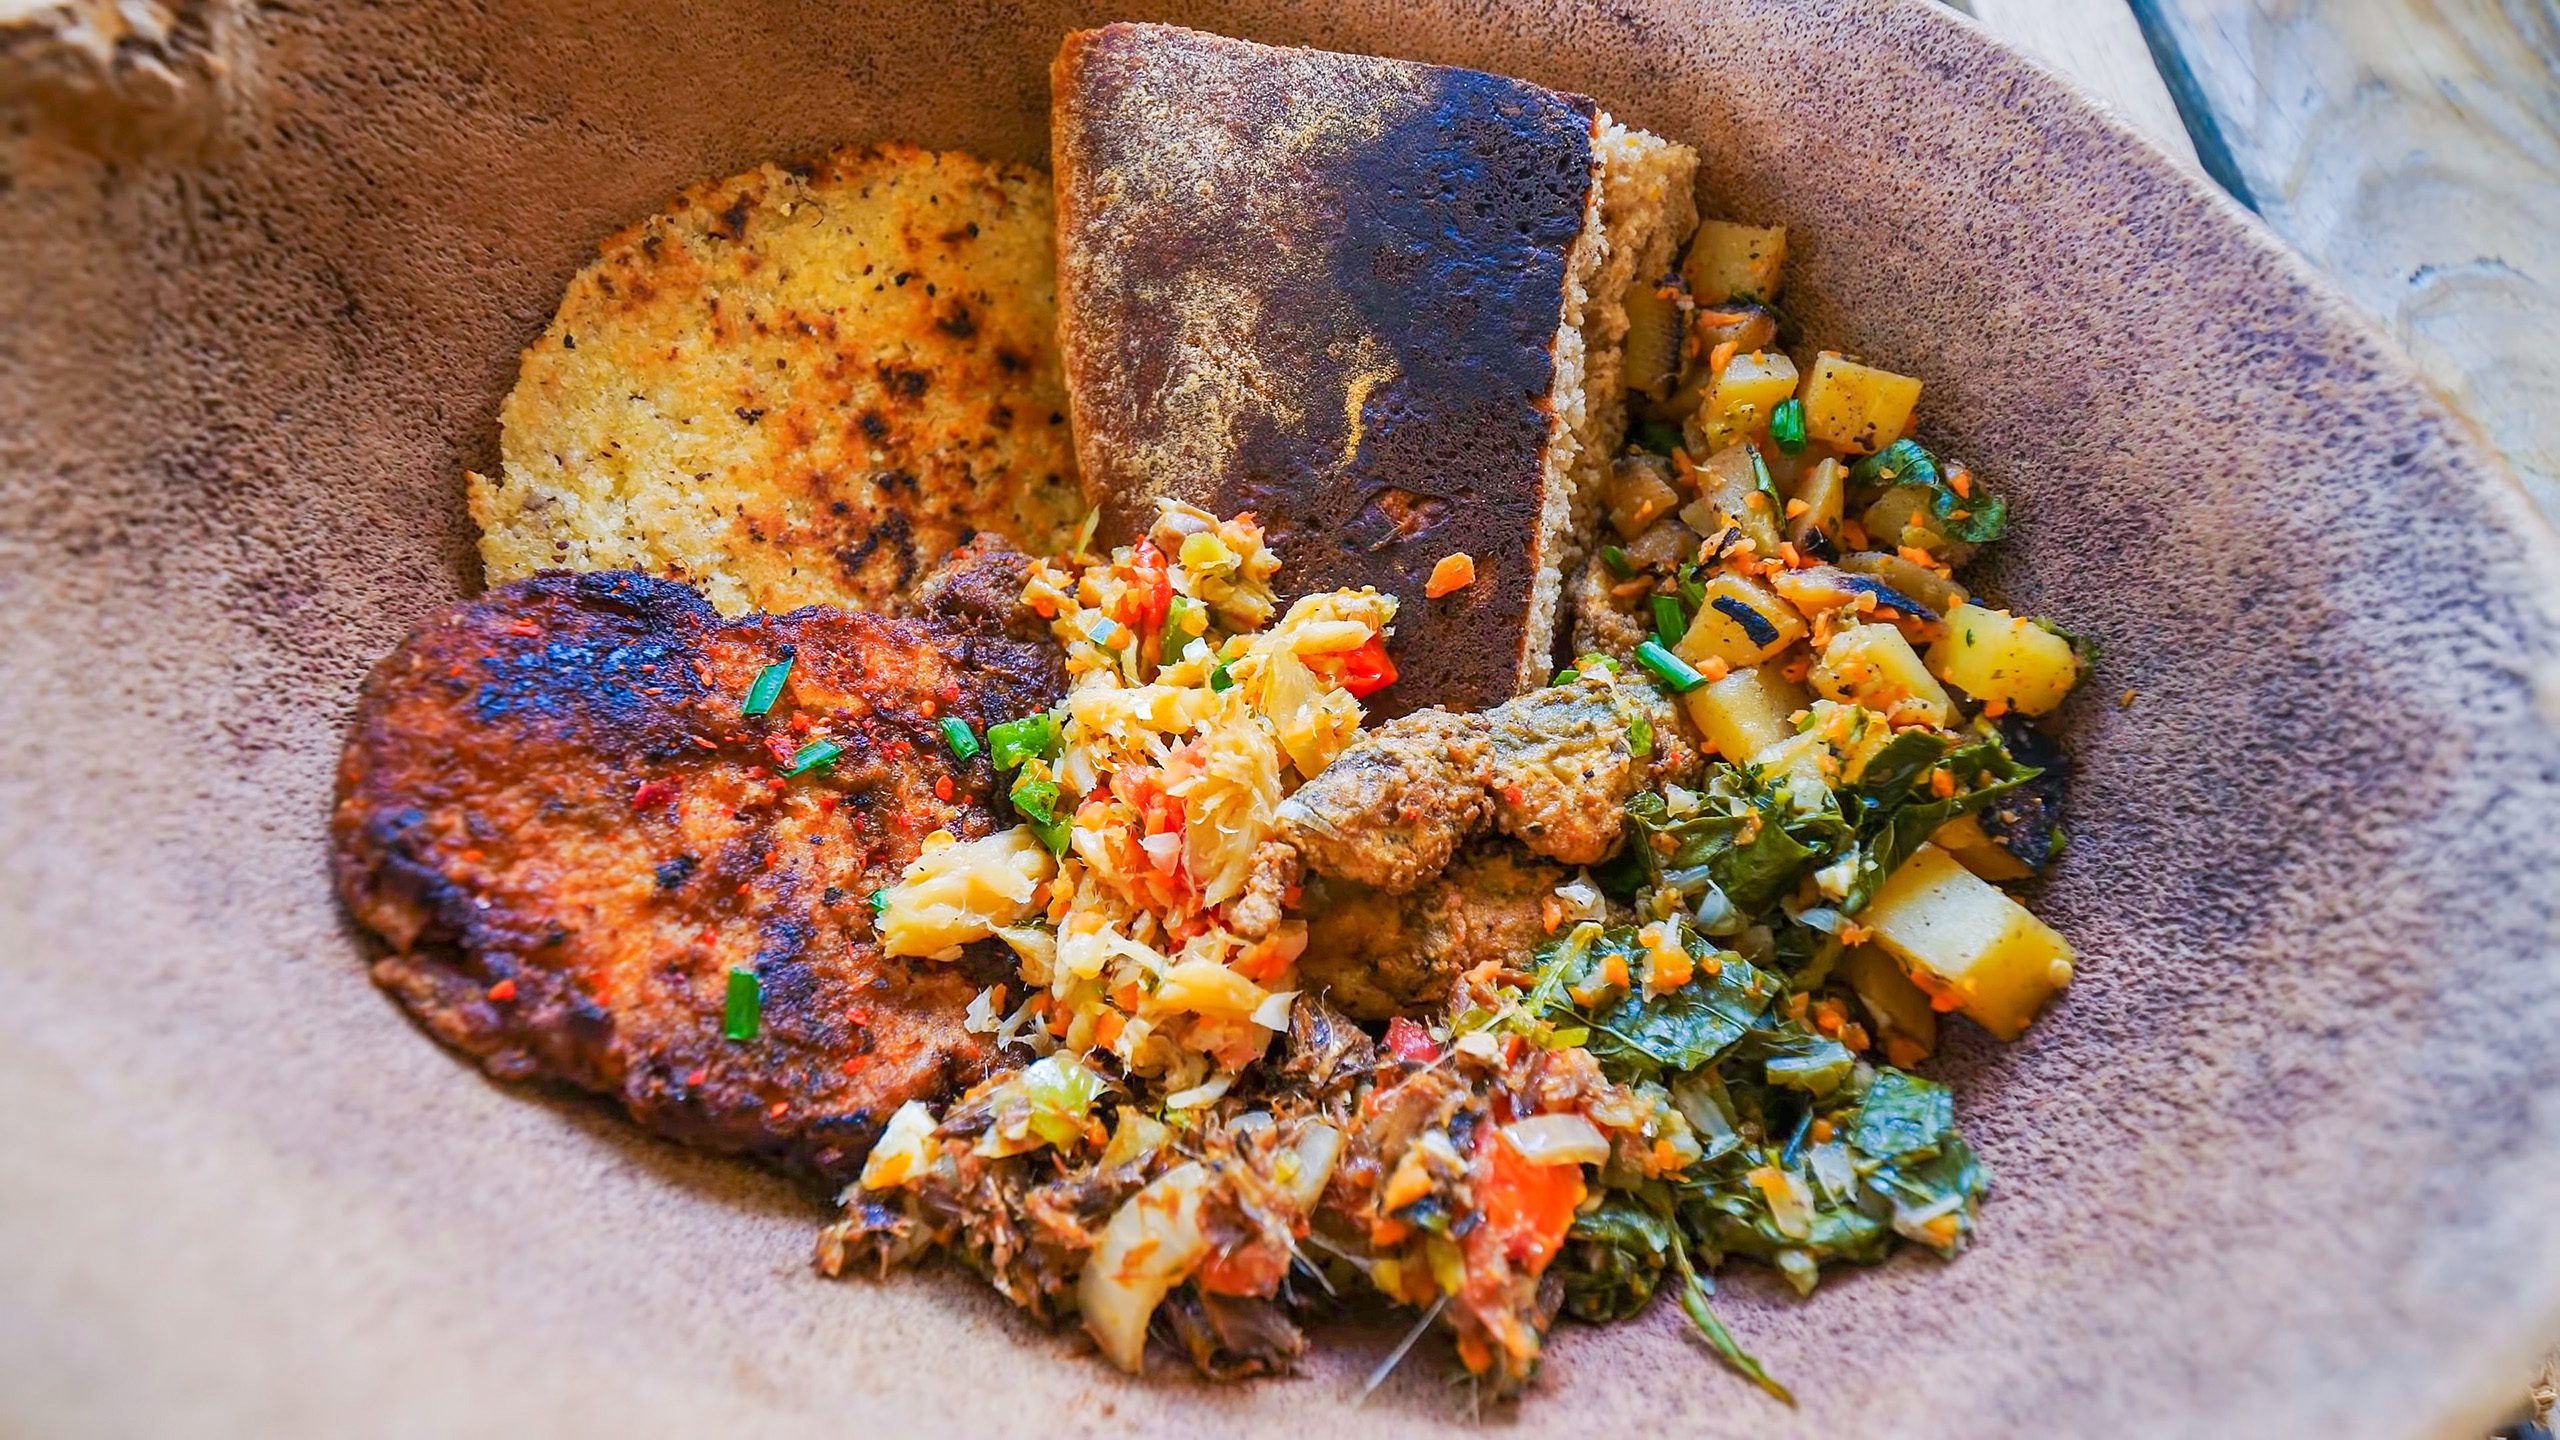 A delicious Caribbean breakfast of bakes, fish, shark, and other items on the island of Tobago | Davidsbeenhere